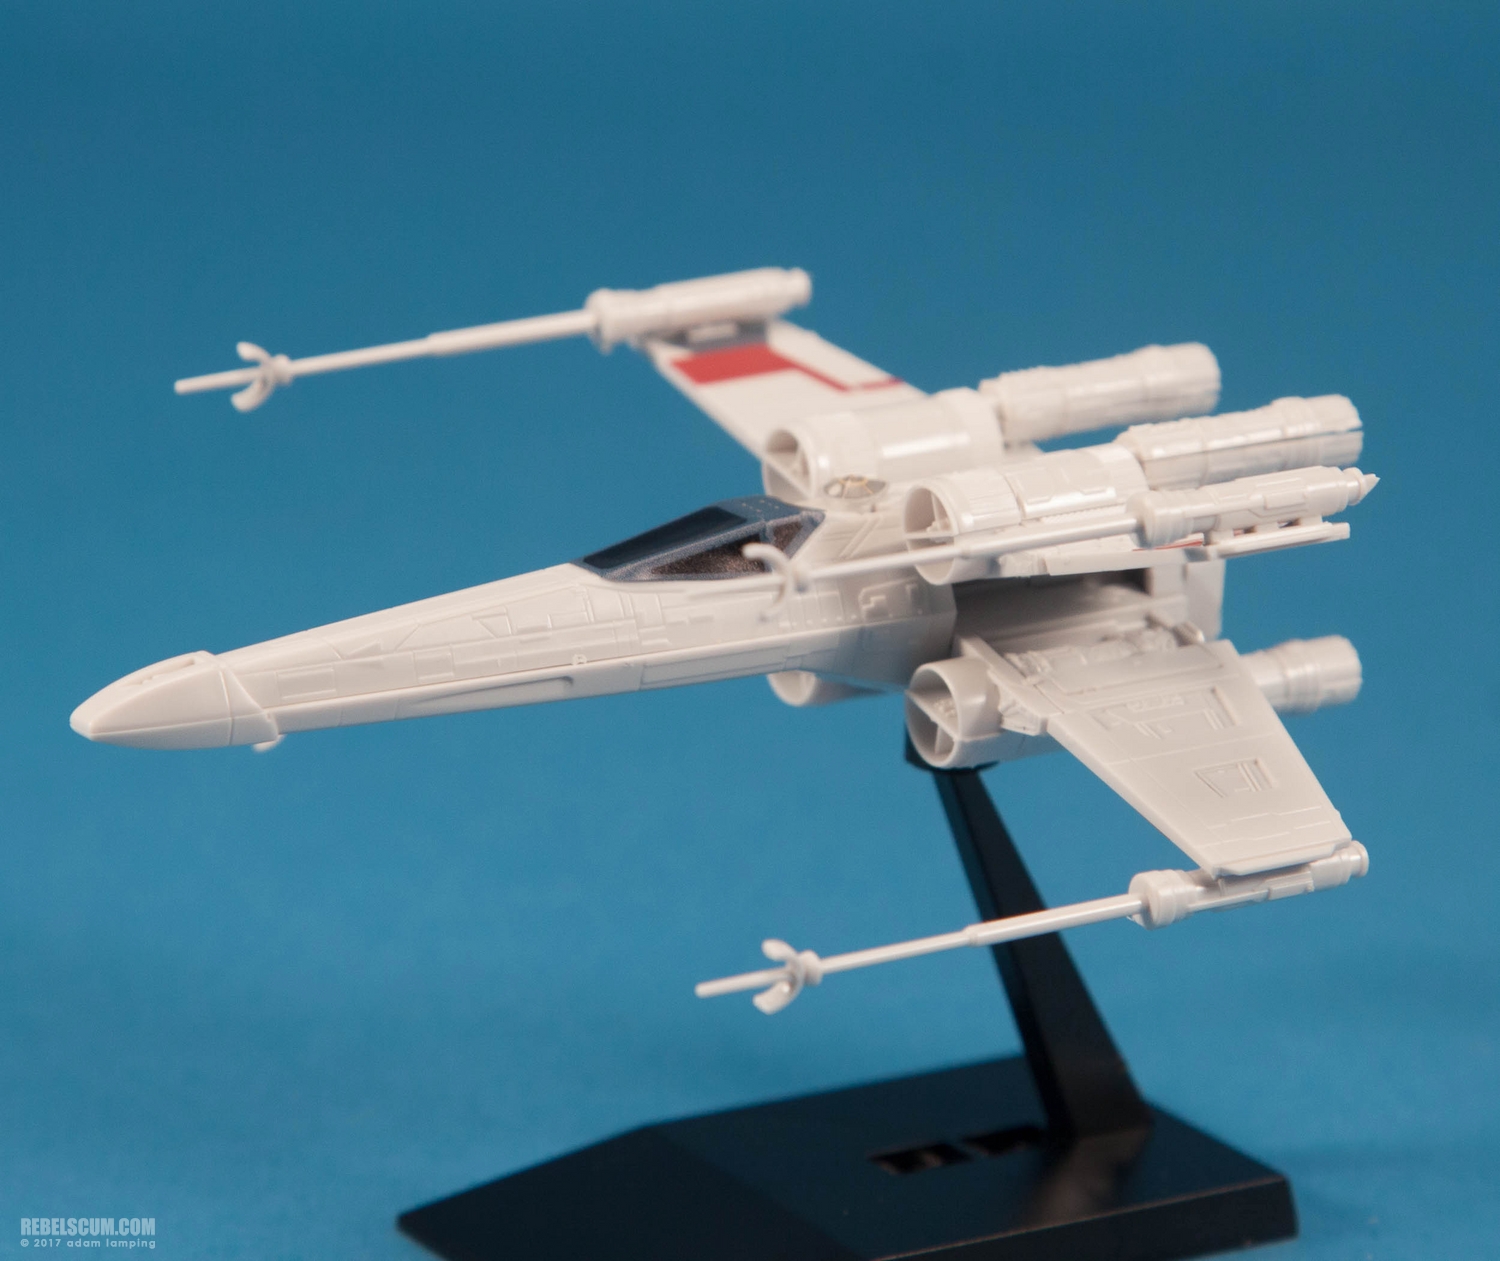 bandai-red-squadron-x-wing-starfighter-scale-model-kit-019.jpg